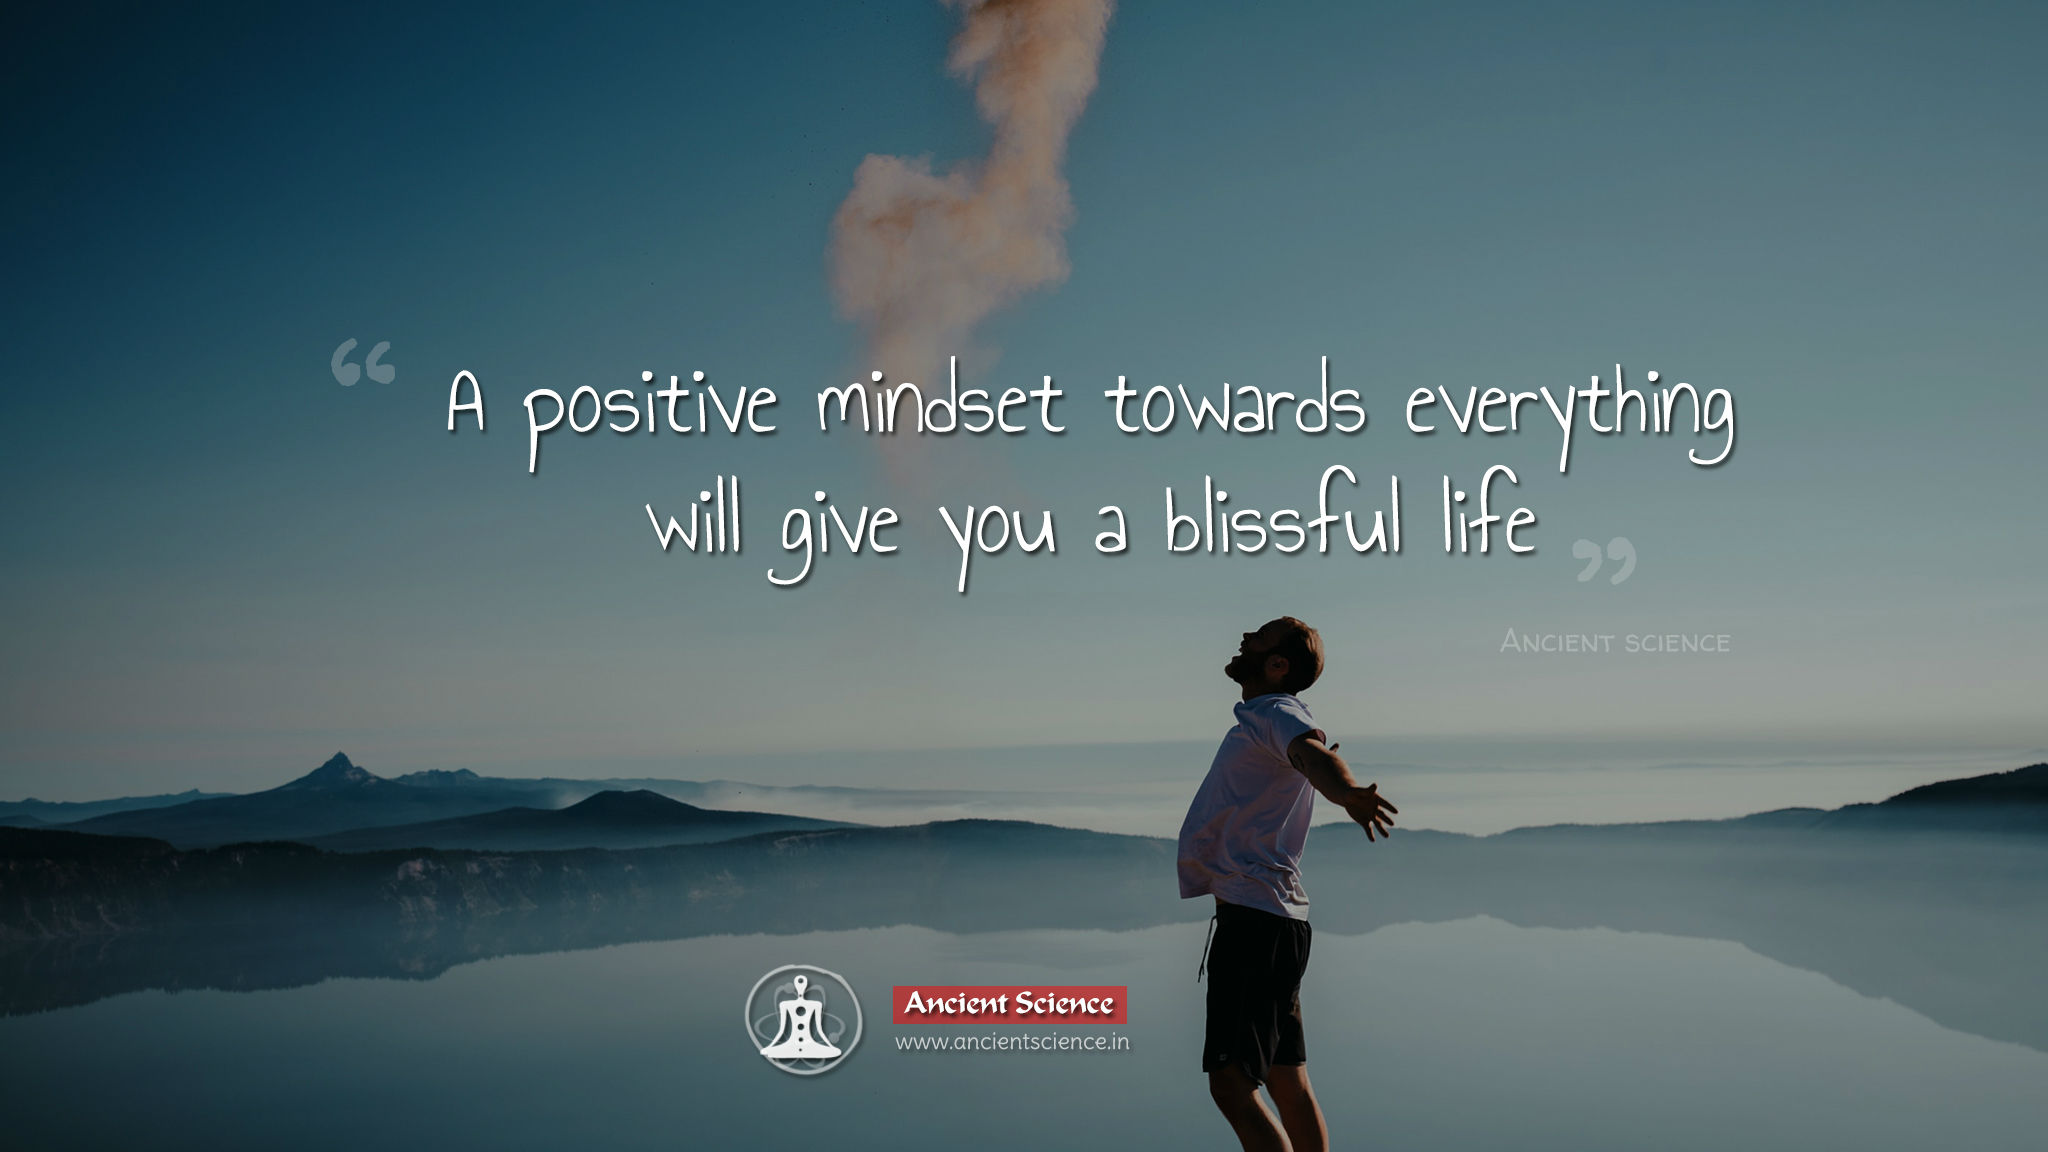 A positive mindset towards everything will give you a blissful life